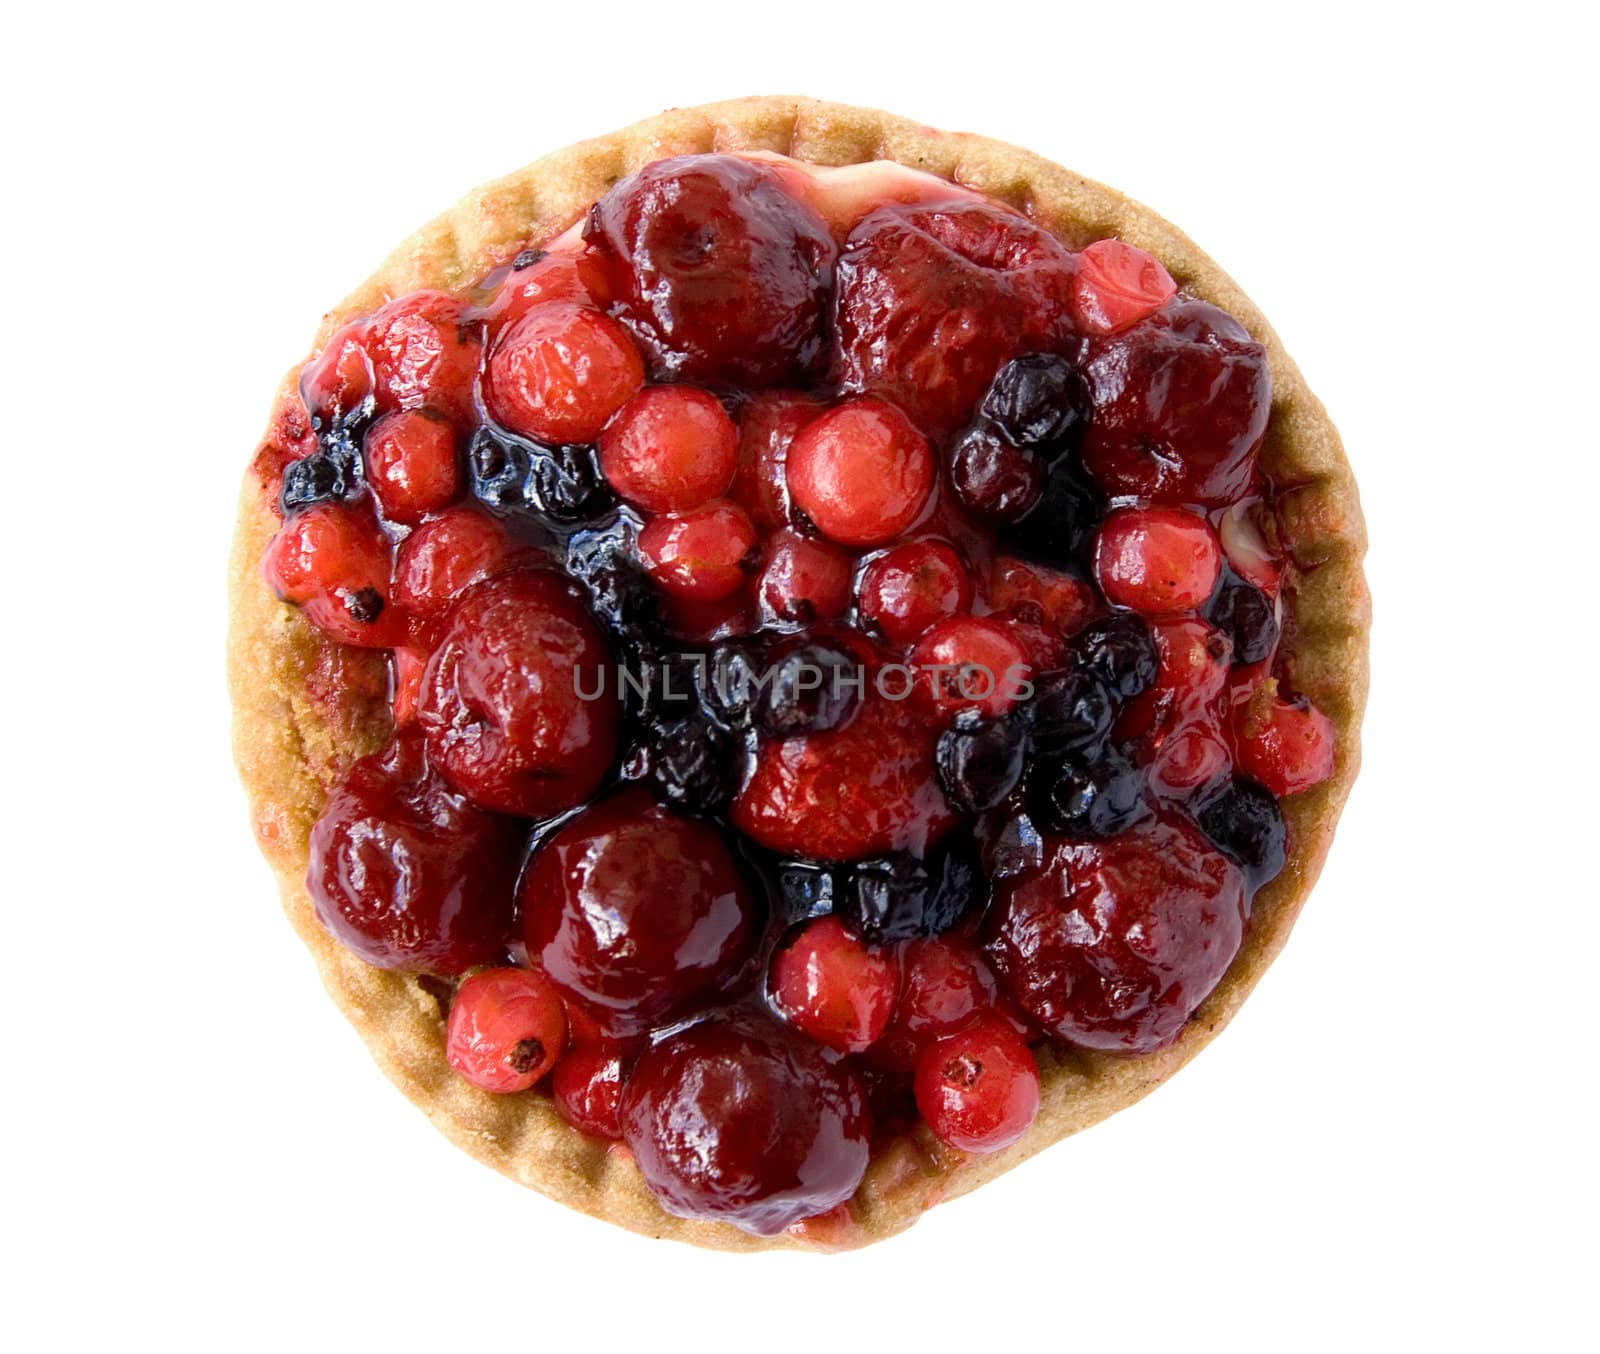 red fruits pie by daboost